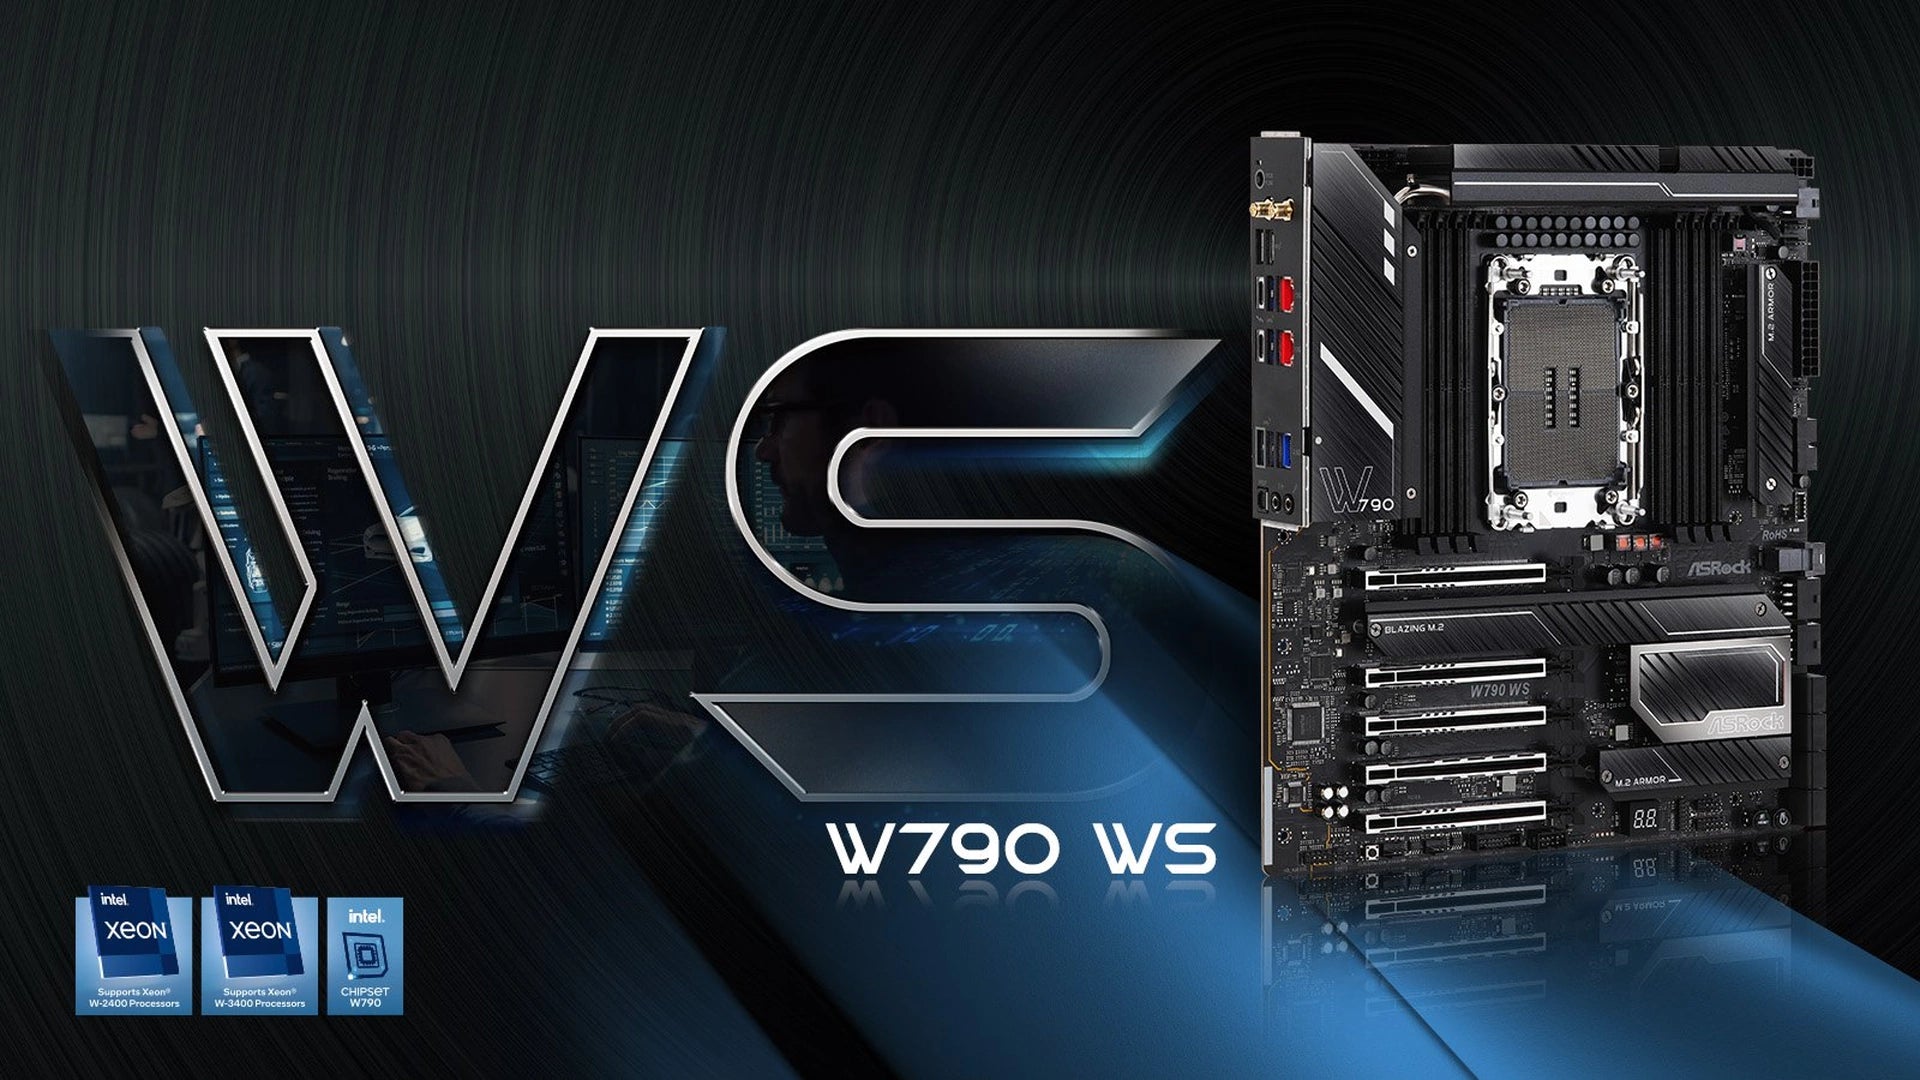 ASRock Launches W790 WS Motherboard to Maximize Productivity with Intel® Xeon® W-2400/W-3400 series processors (LGA4677)